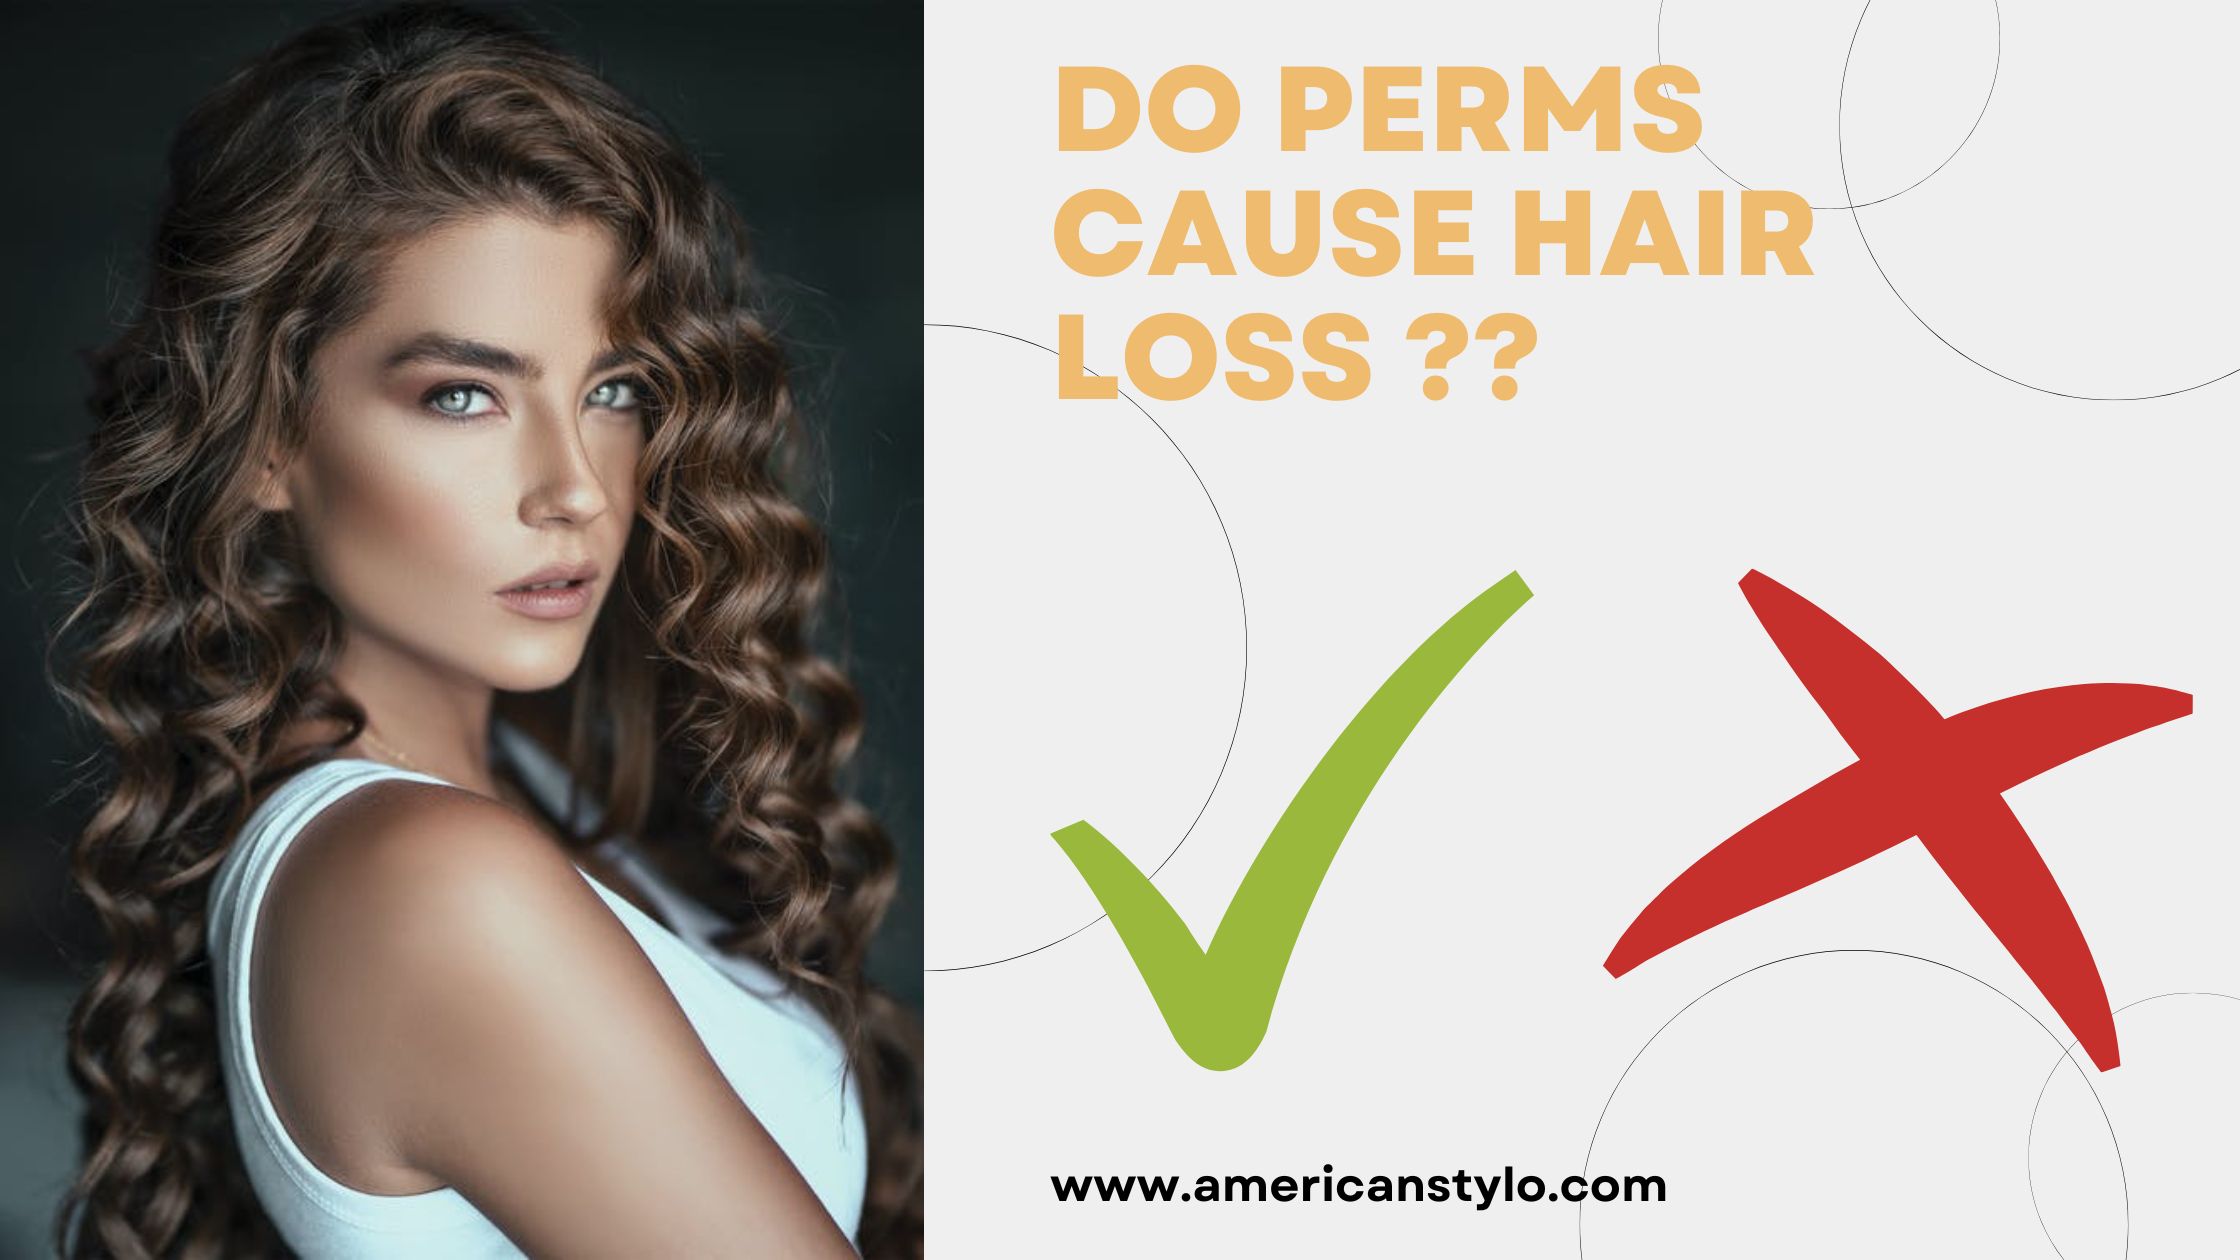 Do perms cause hair loss?